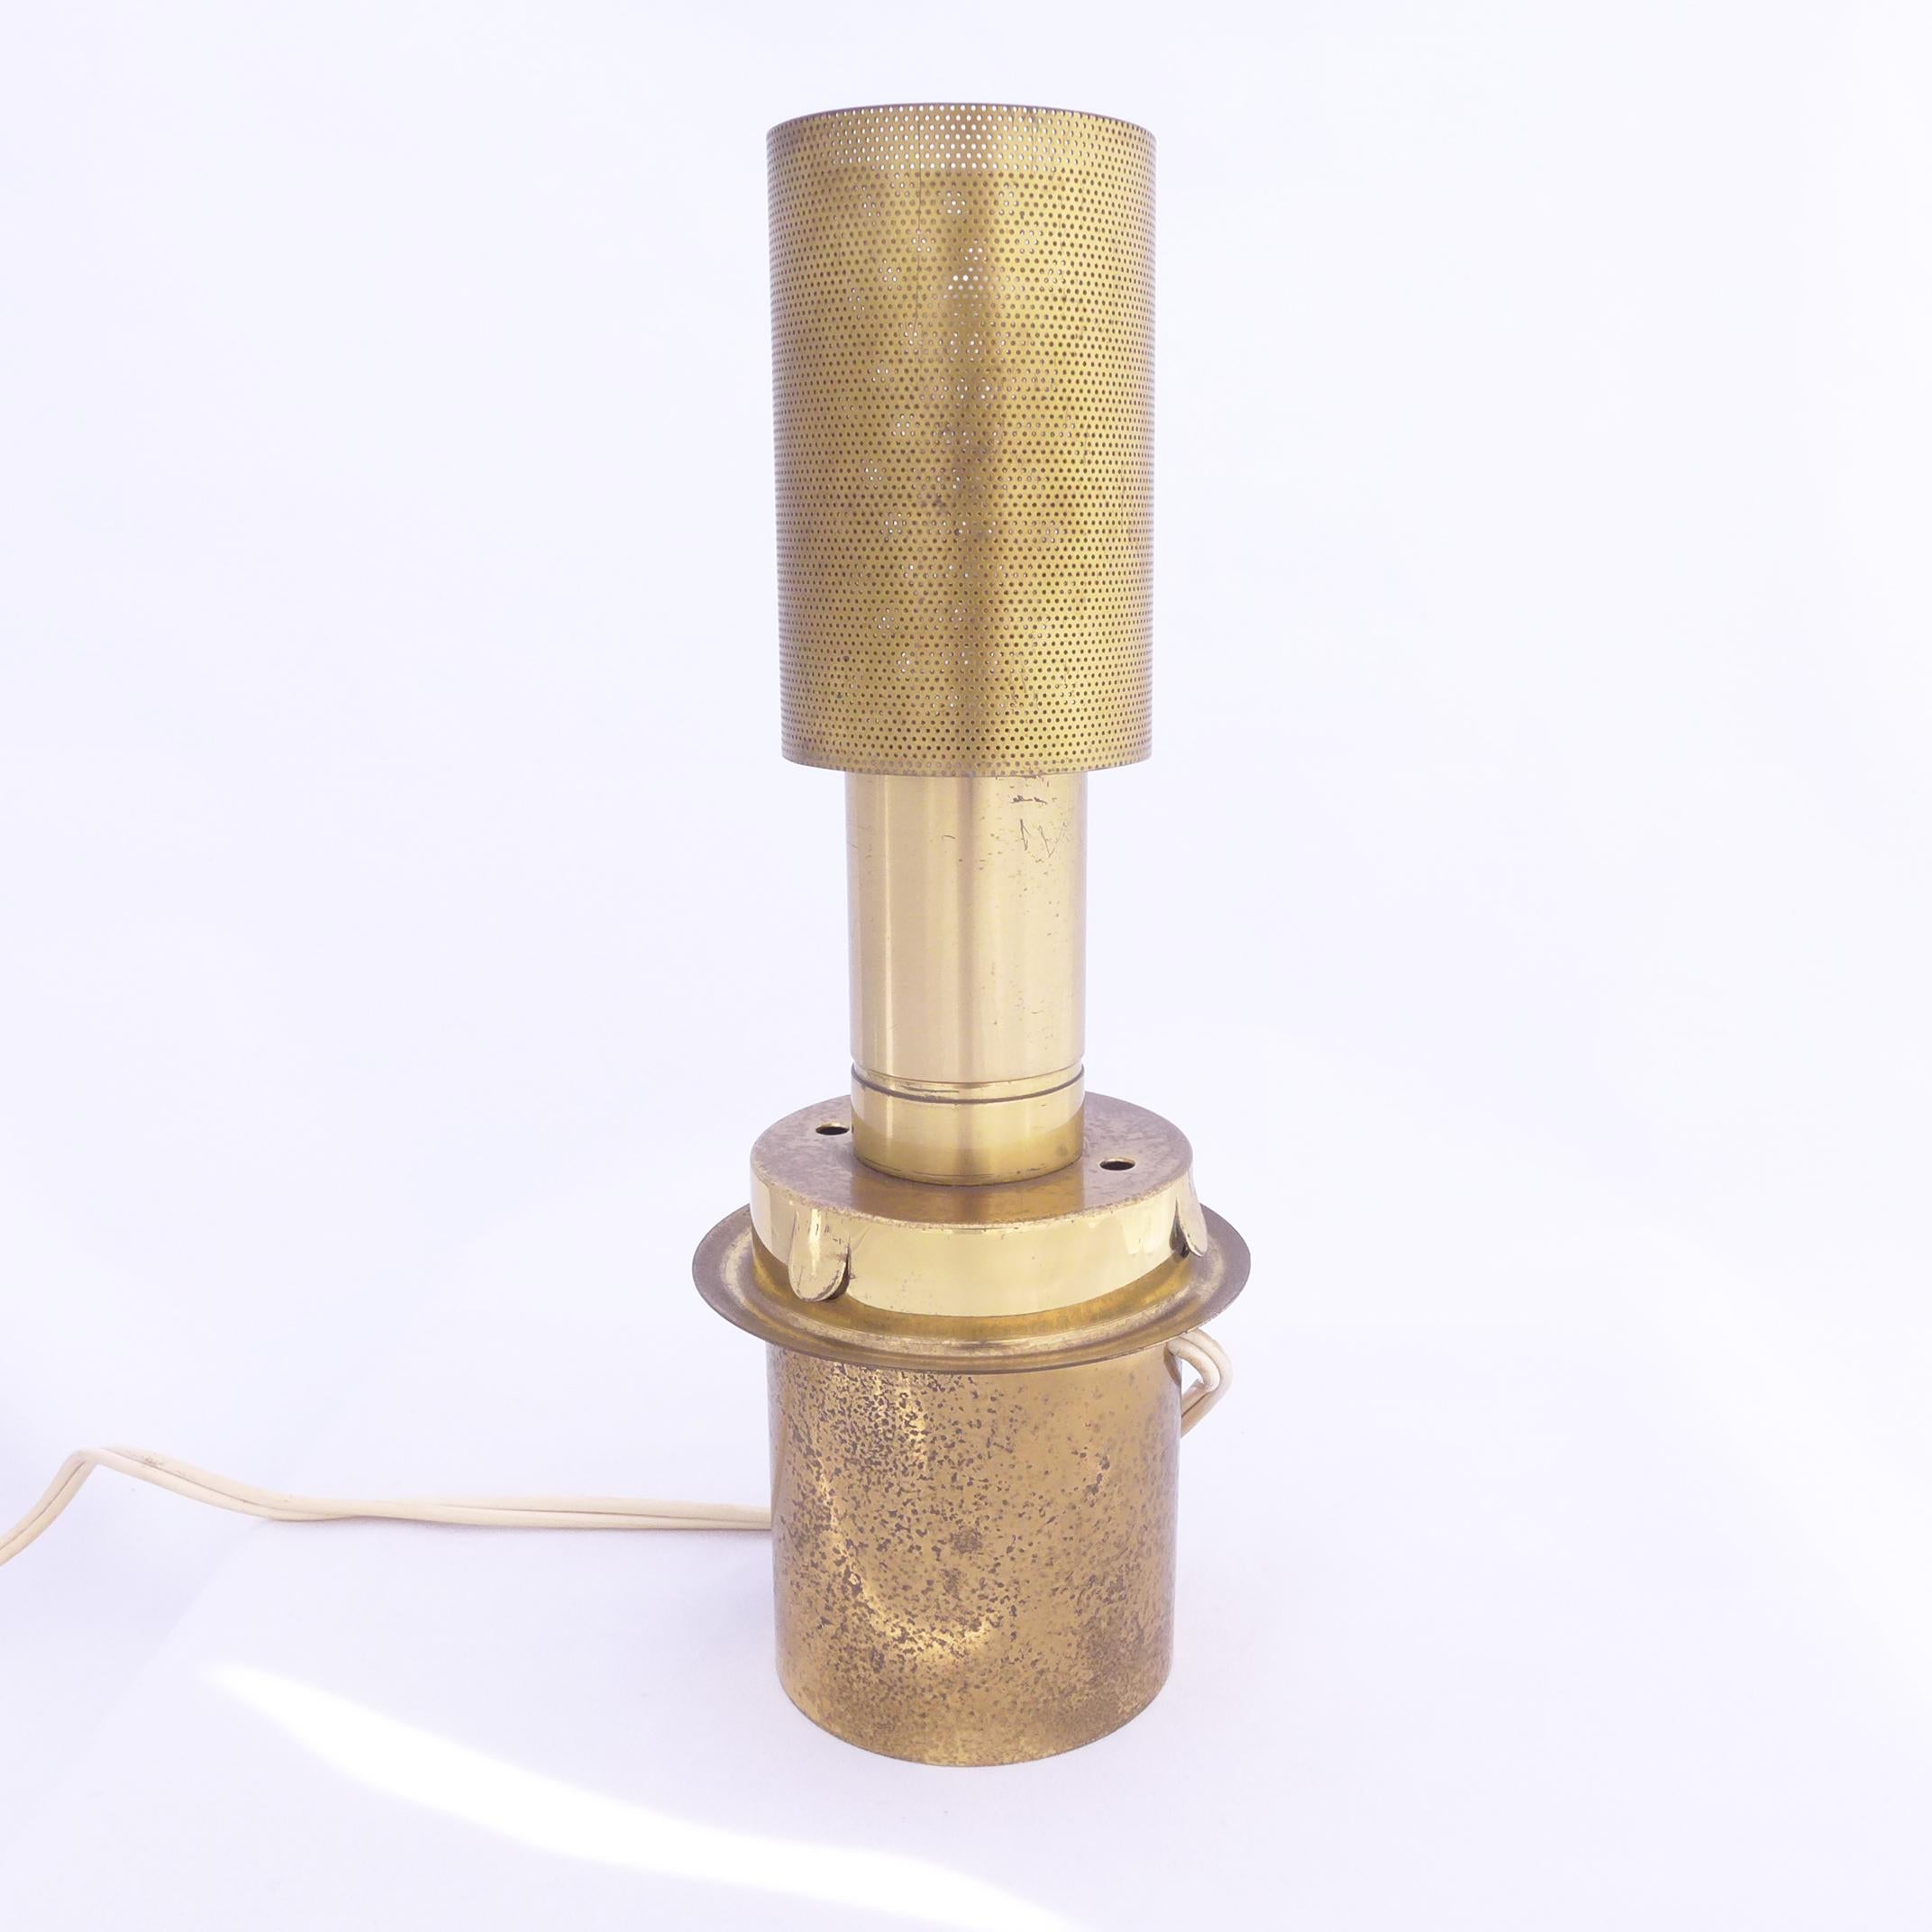 Elegant brass table lamp with rose-tinted glass chimney by the prolific Swedish designer Hans-Agne Jakobsson. The original brass patina is visible revealing the age and character of the material. It is also possible to polish the brass to give it a